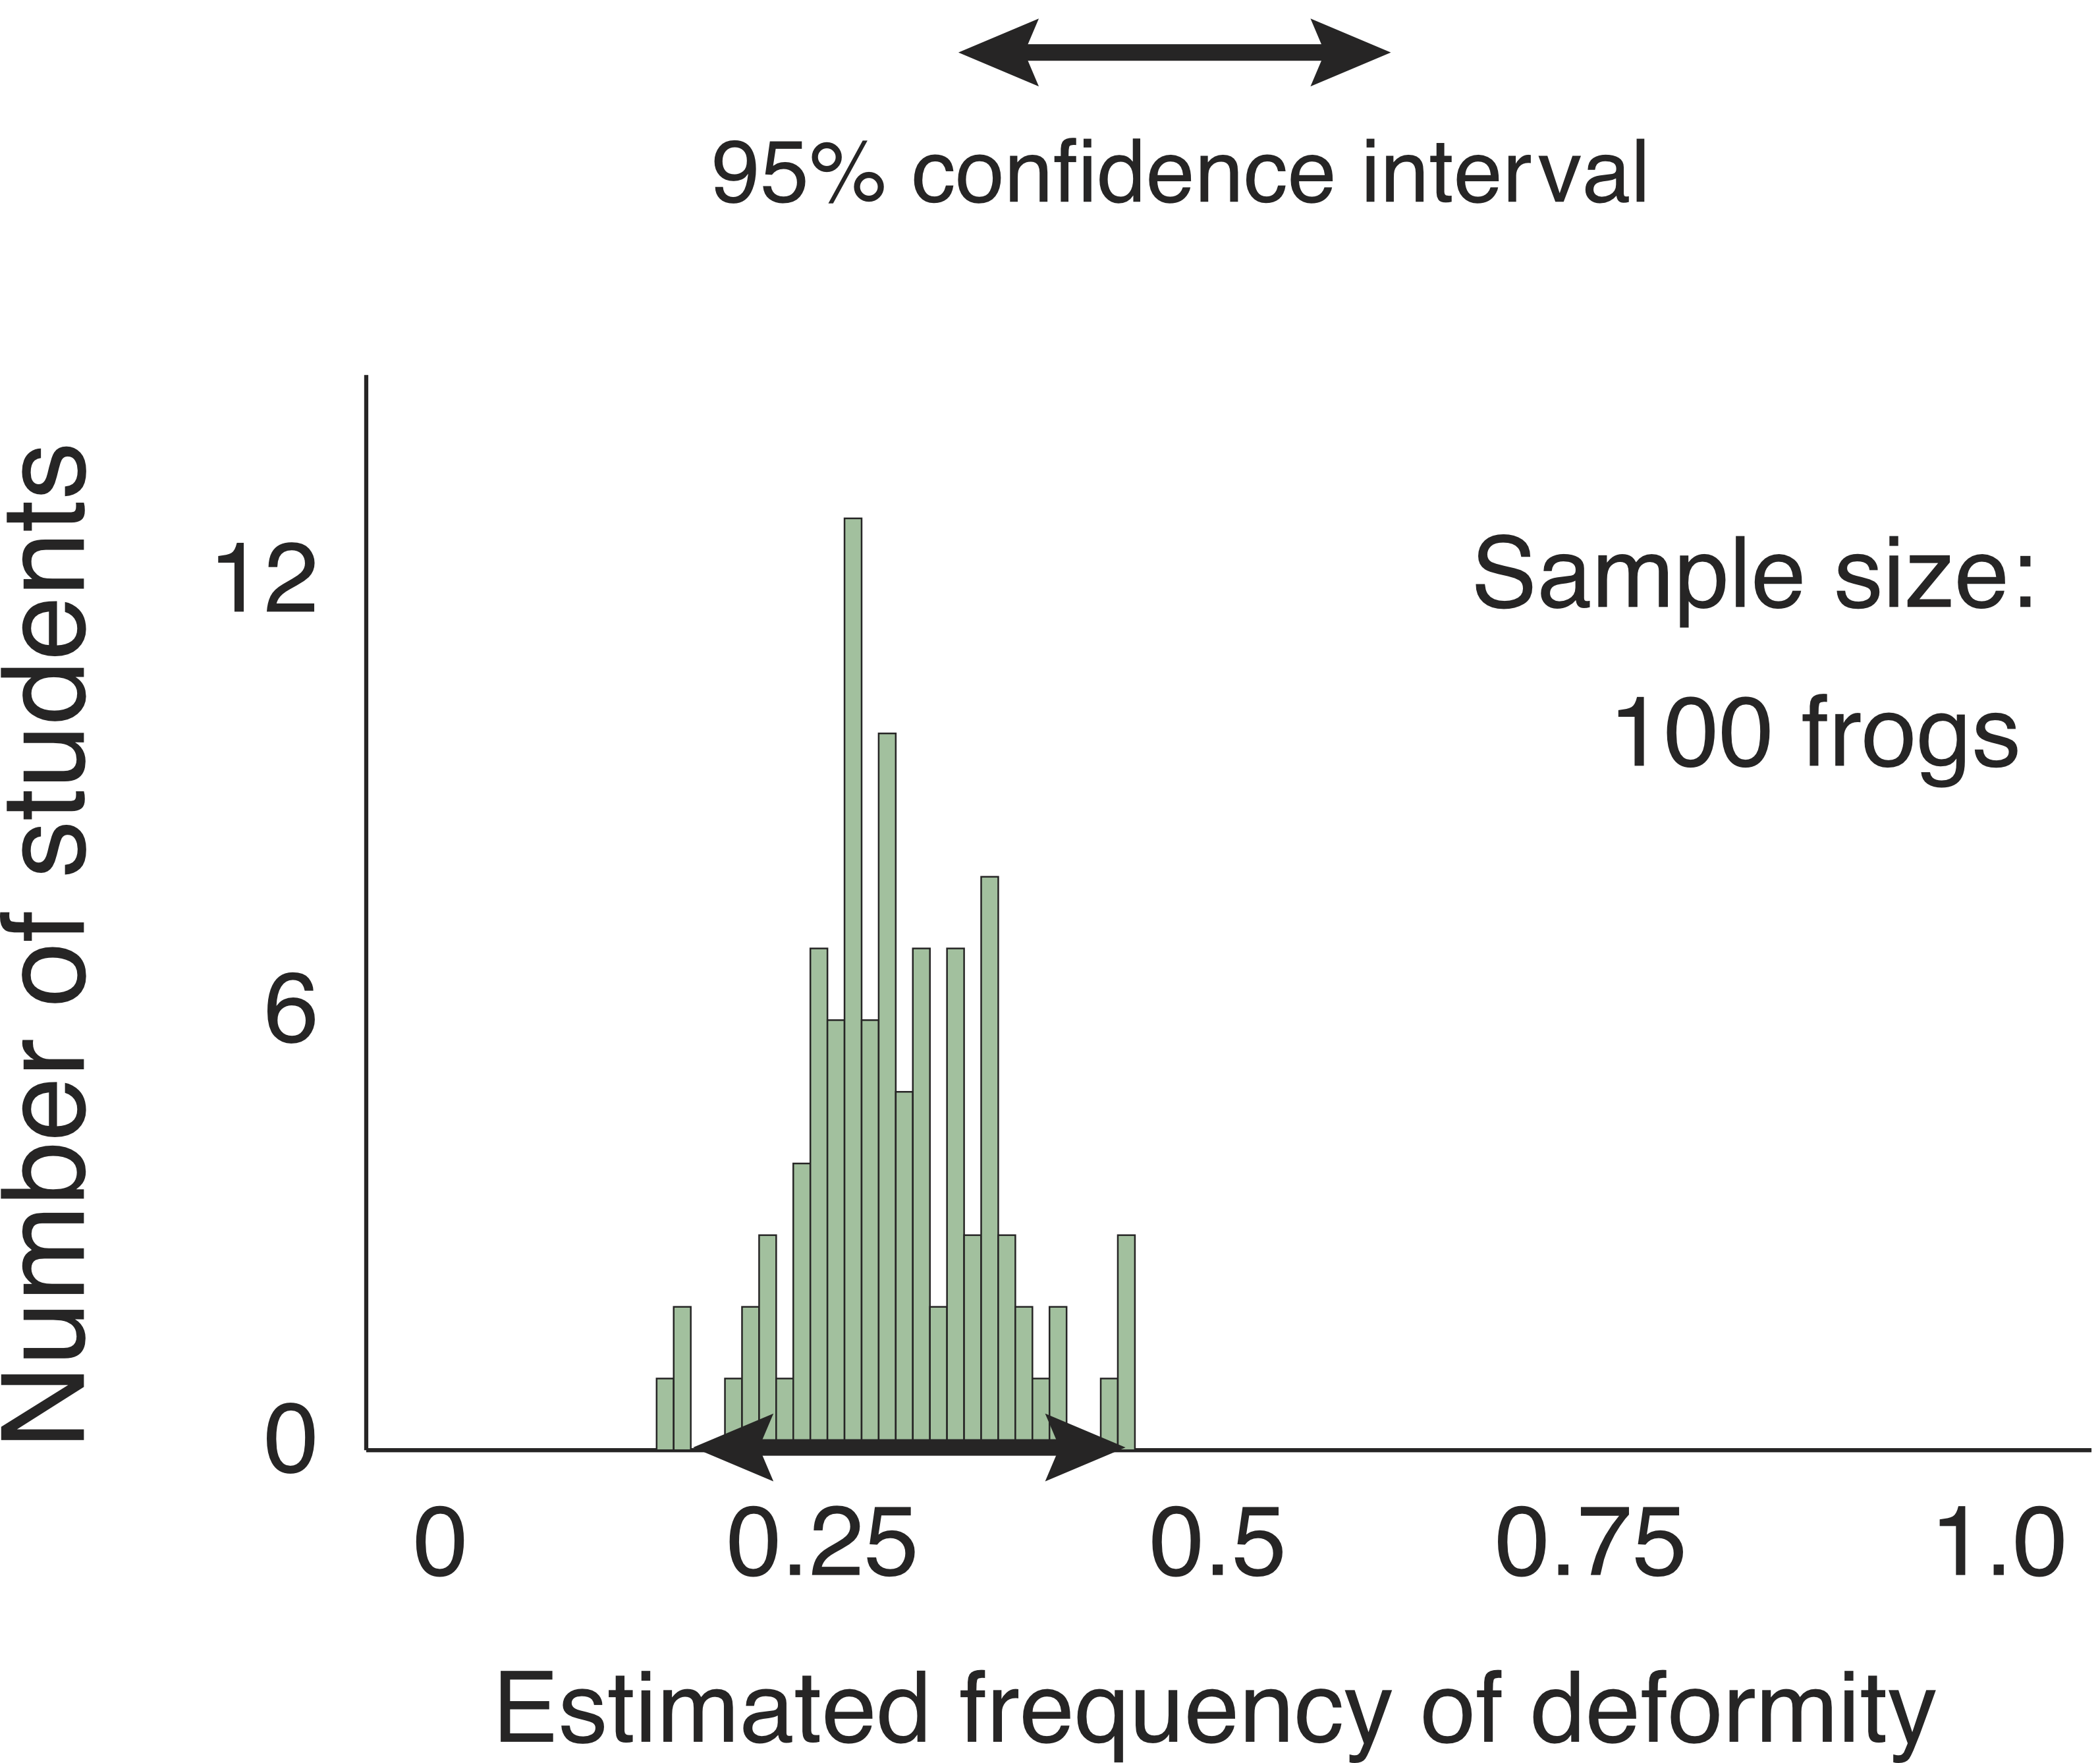 Histogram, labeled Sample size: 100 frogs. Vertical axis is Number of students, ranging from 0 to 30. Horizontal axis is Estimated frequency of deformity, ranging from 0 to 1. The bars show that most estimates were in the ballpark of 30%, but ranged from 17% to 46%. A key indicates that the double headed black arrow on the horiztonal axis represents the 95% confidence interval. It ranges from 19% to 44%.